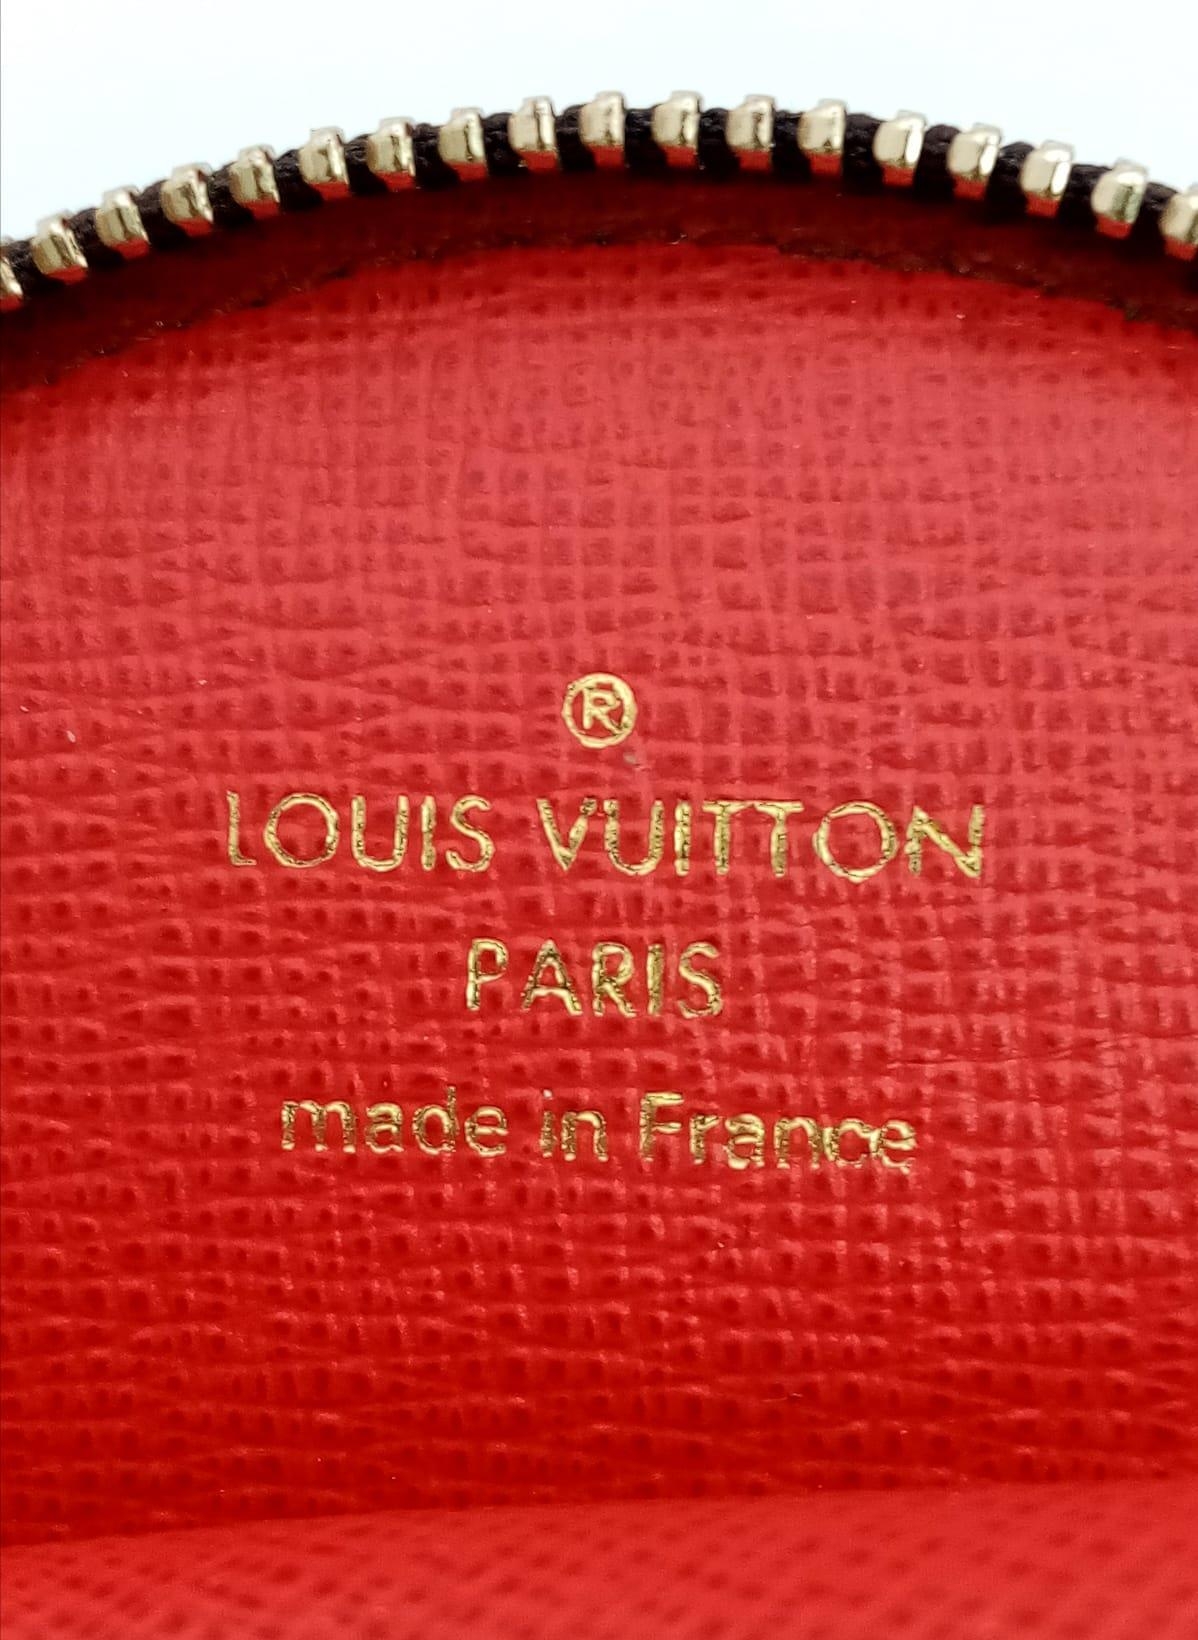 Louise Vuitton Coin Wallet, 2020 Christmas Animation Bumper Cars edition. LV monogrammed pattern, - Image 3 of 3